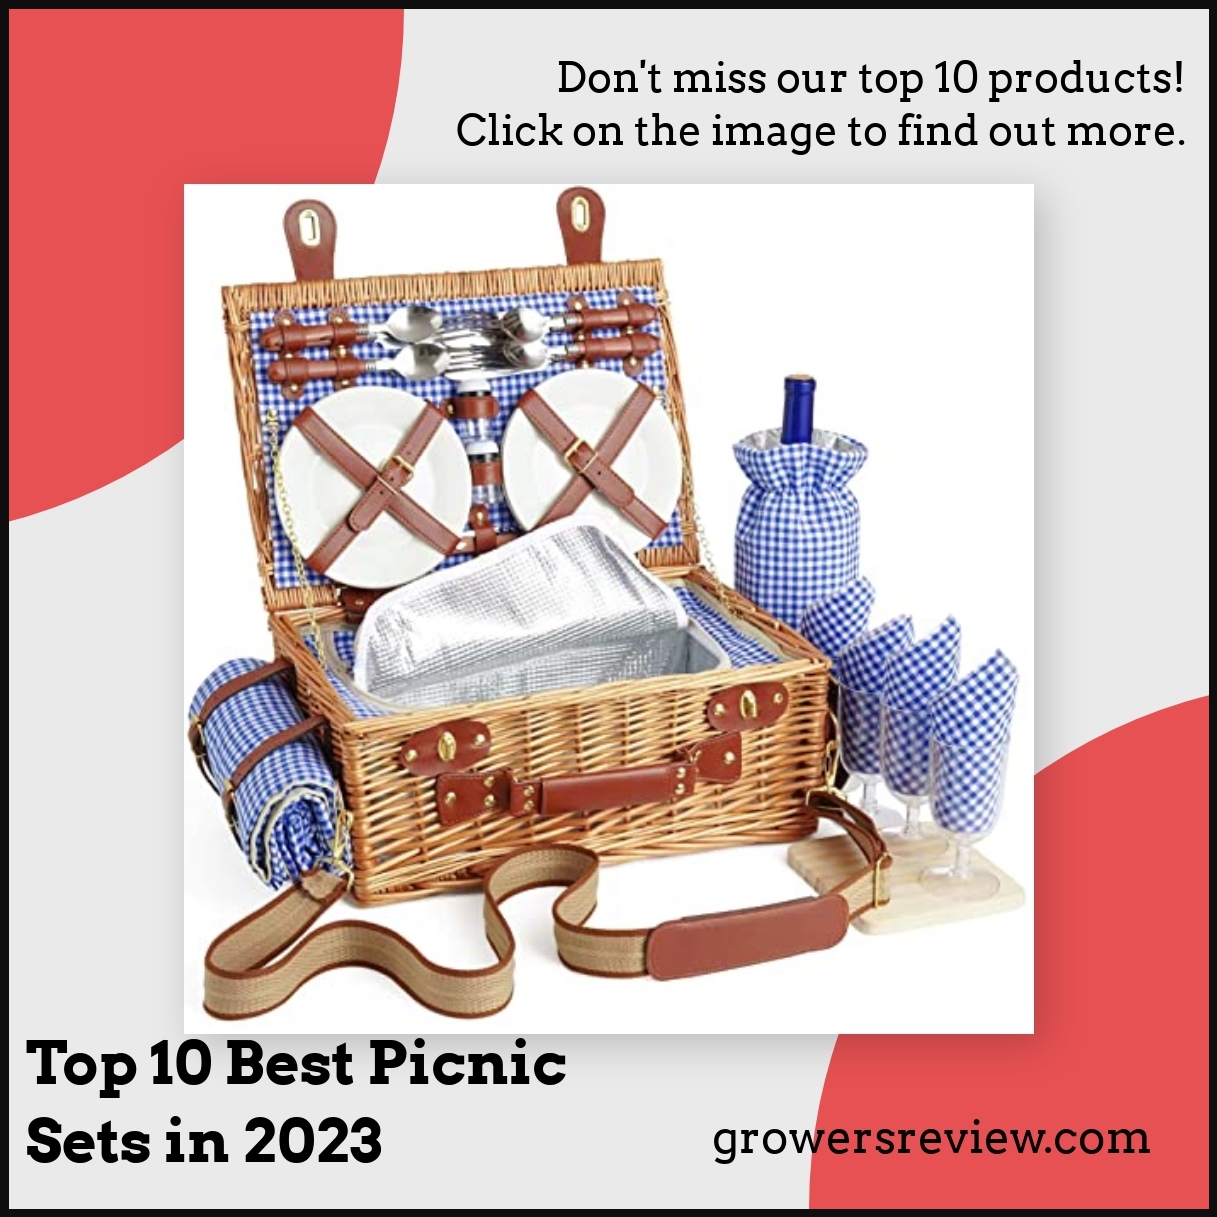 Top 10 Best Picnic Sets in 2023